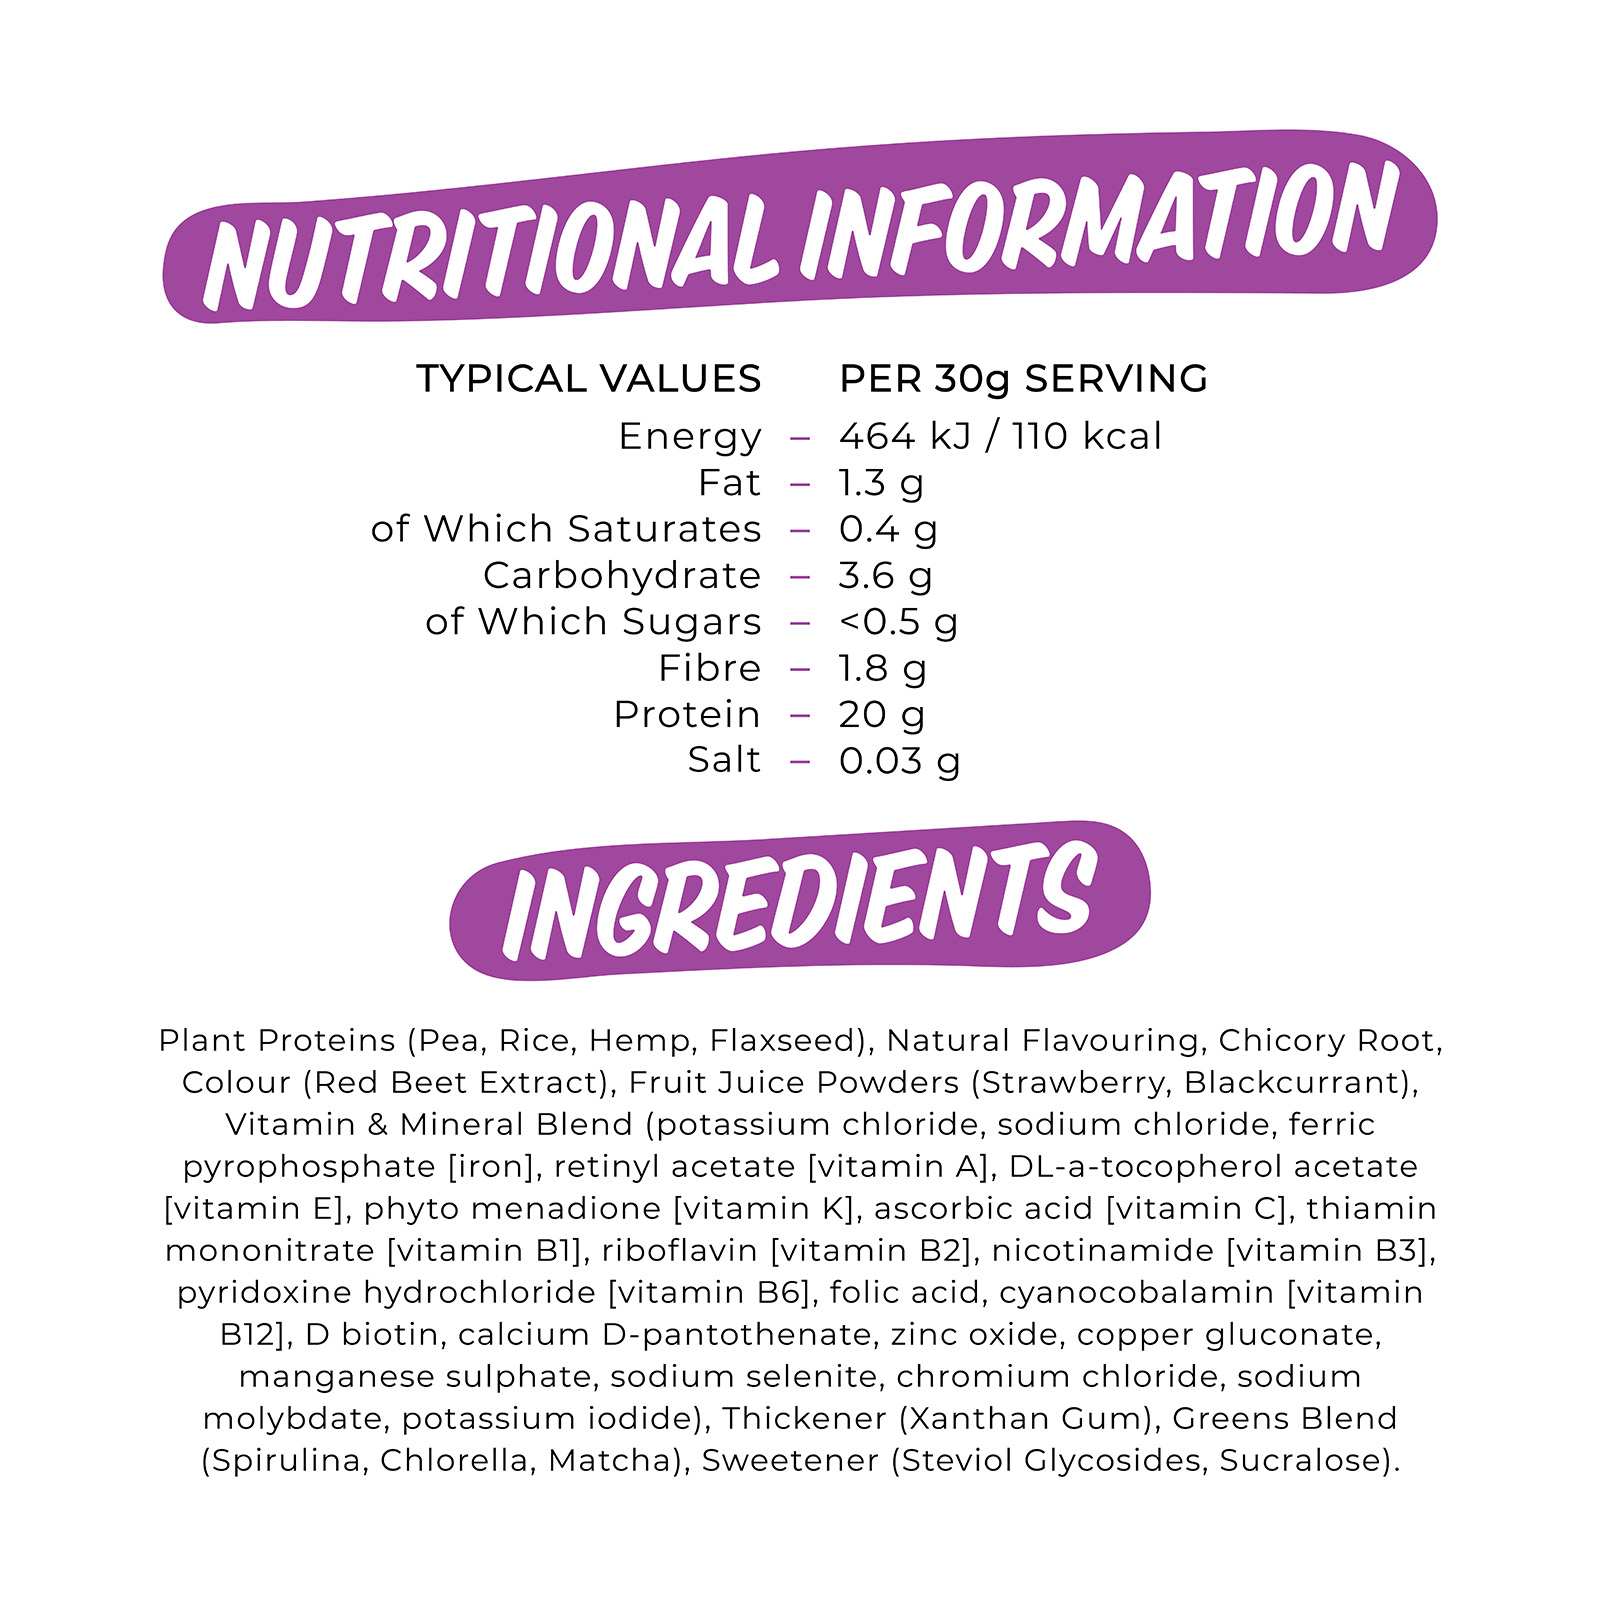 

                          TYPICAL VALUES PER 30g SERVING Energy 464 kJ /110 kcal Fat 1.3 g of Which Saturates 0.4 g Carbohydrate 3.6 g of Which Sugars <0.5 g Fibre 1.8 g Protein 20 g Salt 0.03 g 

                          Plant Proteins (Pea, Rice, Hemp, Flaxseed), Natural Flavouring, Chicory Root, Colour (Red Beet Extract), Fruit Juice Powders (Strawberry, Blackcurrant), Vitamin & Mineral Blend (potassium chloride, sodium chloride, ferric pyrophosphate [iron], retinyl acetate [vitamin A], DL-a-tocopherol acetate [vitamin E], phyto menadione [vitamin K], ascorbic acid [vitamin C], thiamin mononitrate [vitamin Efl], riboflavin [vitamin B2], nicotinamide [vitamin B3], pyridoxine hydrochloride [vitamin B6], folic acid, cyanocobalamin [vitamin B12], D biotin, calcium D-pantothenate, zinc oxide, copper gluconate, manganese sulphate, sodium selenite, chromium chloride, sodium molybdate, potassium iodide), Thickener (Xanthan Gum), Greens Blend (Spirulina, Chlorella, Matcha), Sweetener (Steviol Glycosides, Sucralose). 

                          